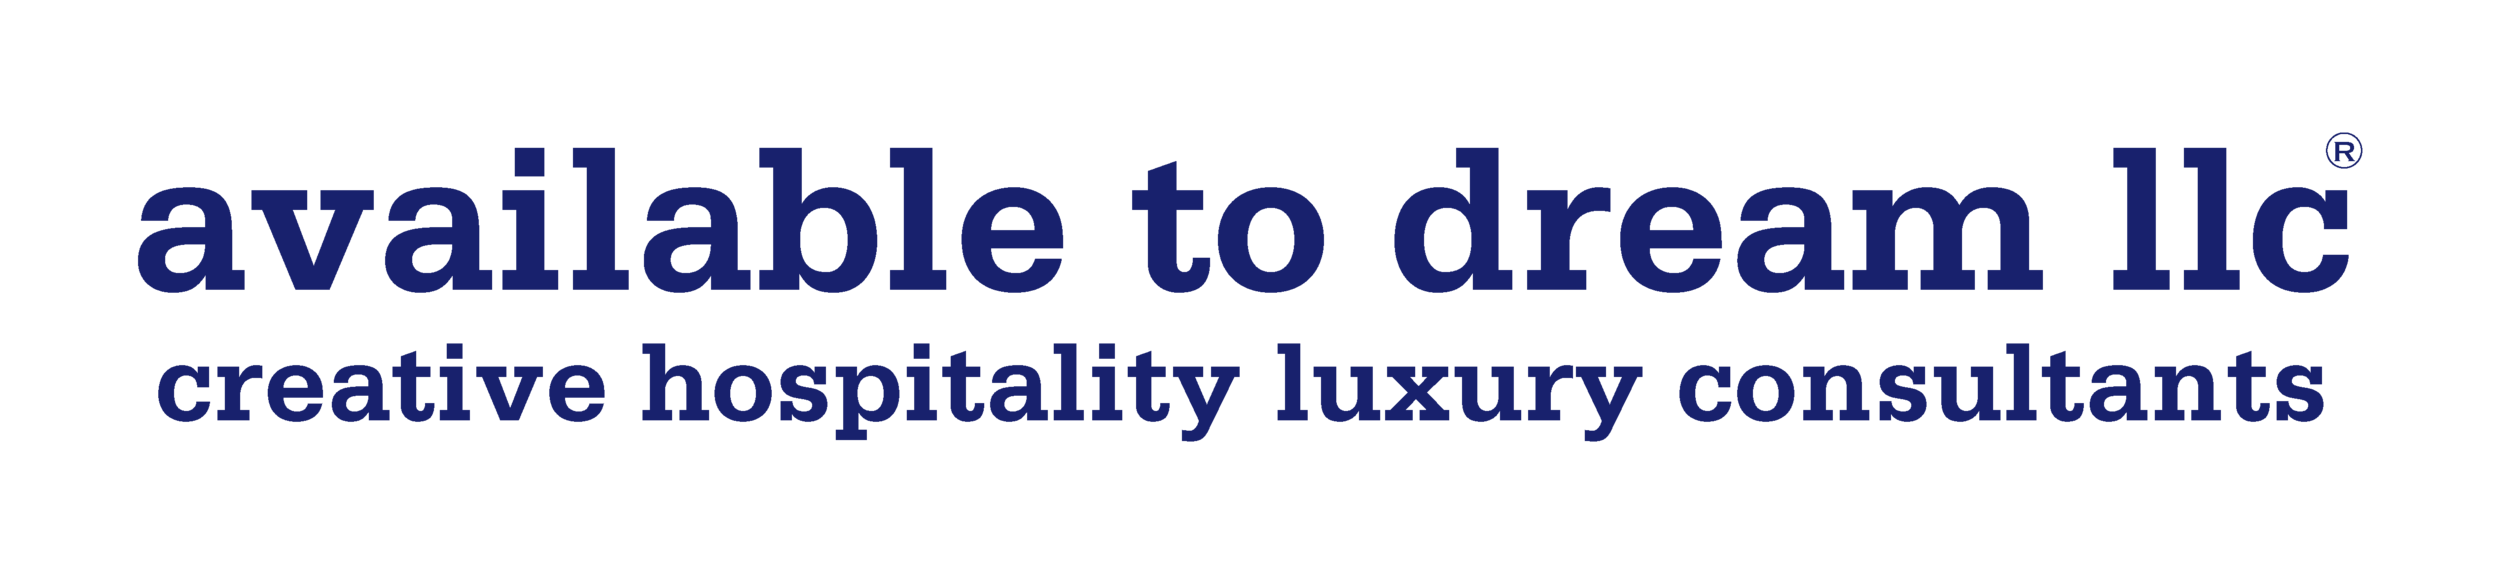 AVAILABLE TO DREAM LLC - creative hospitality luxury consultants 